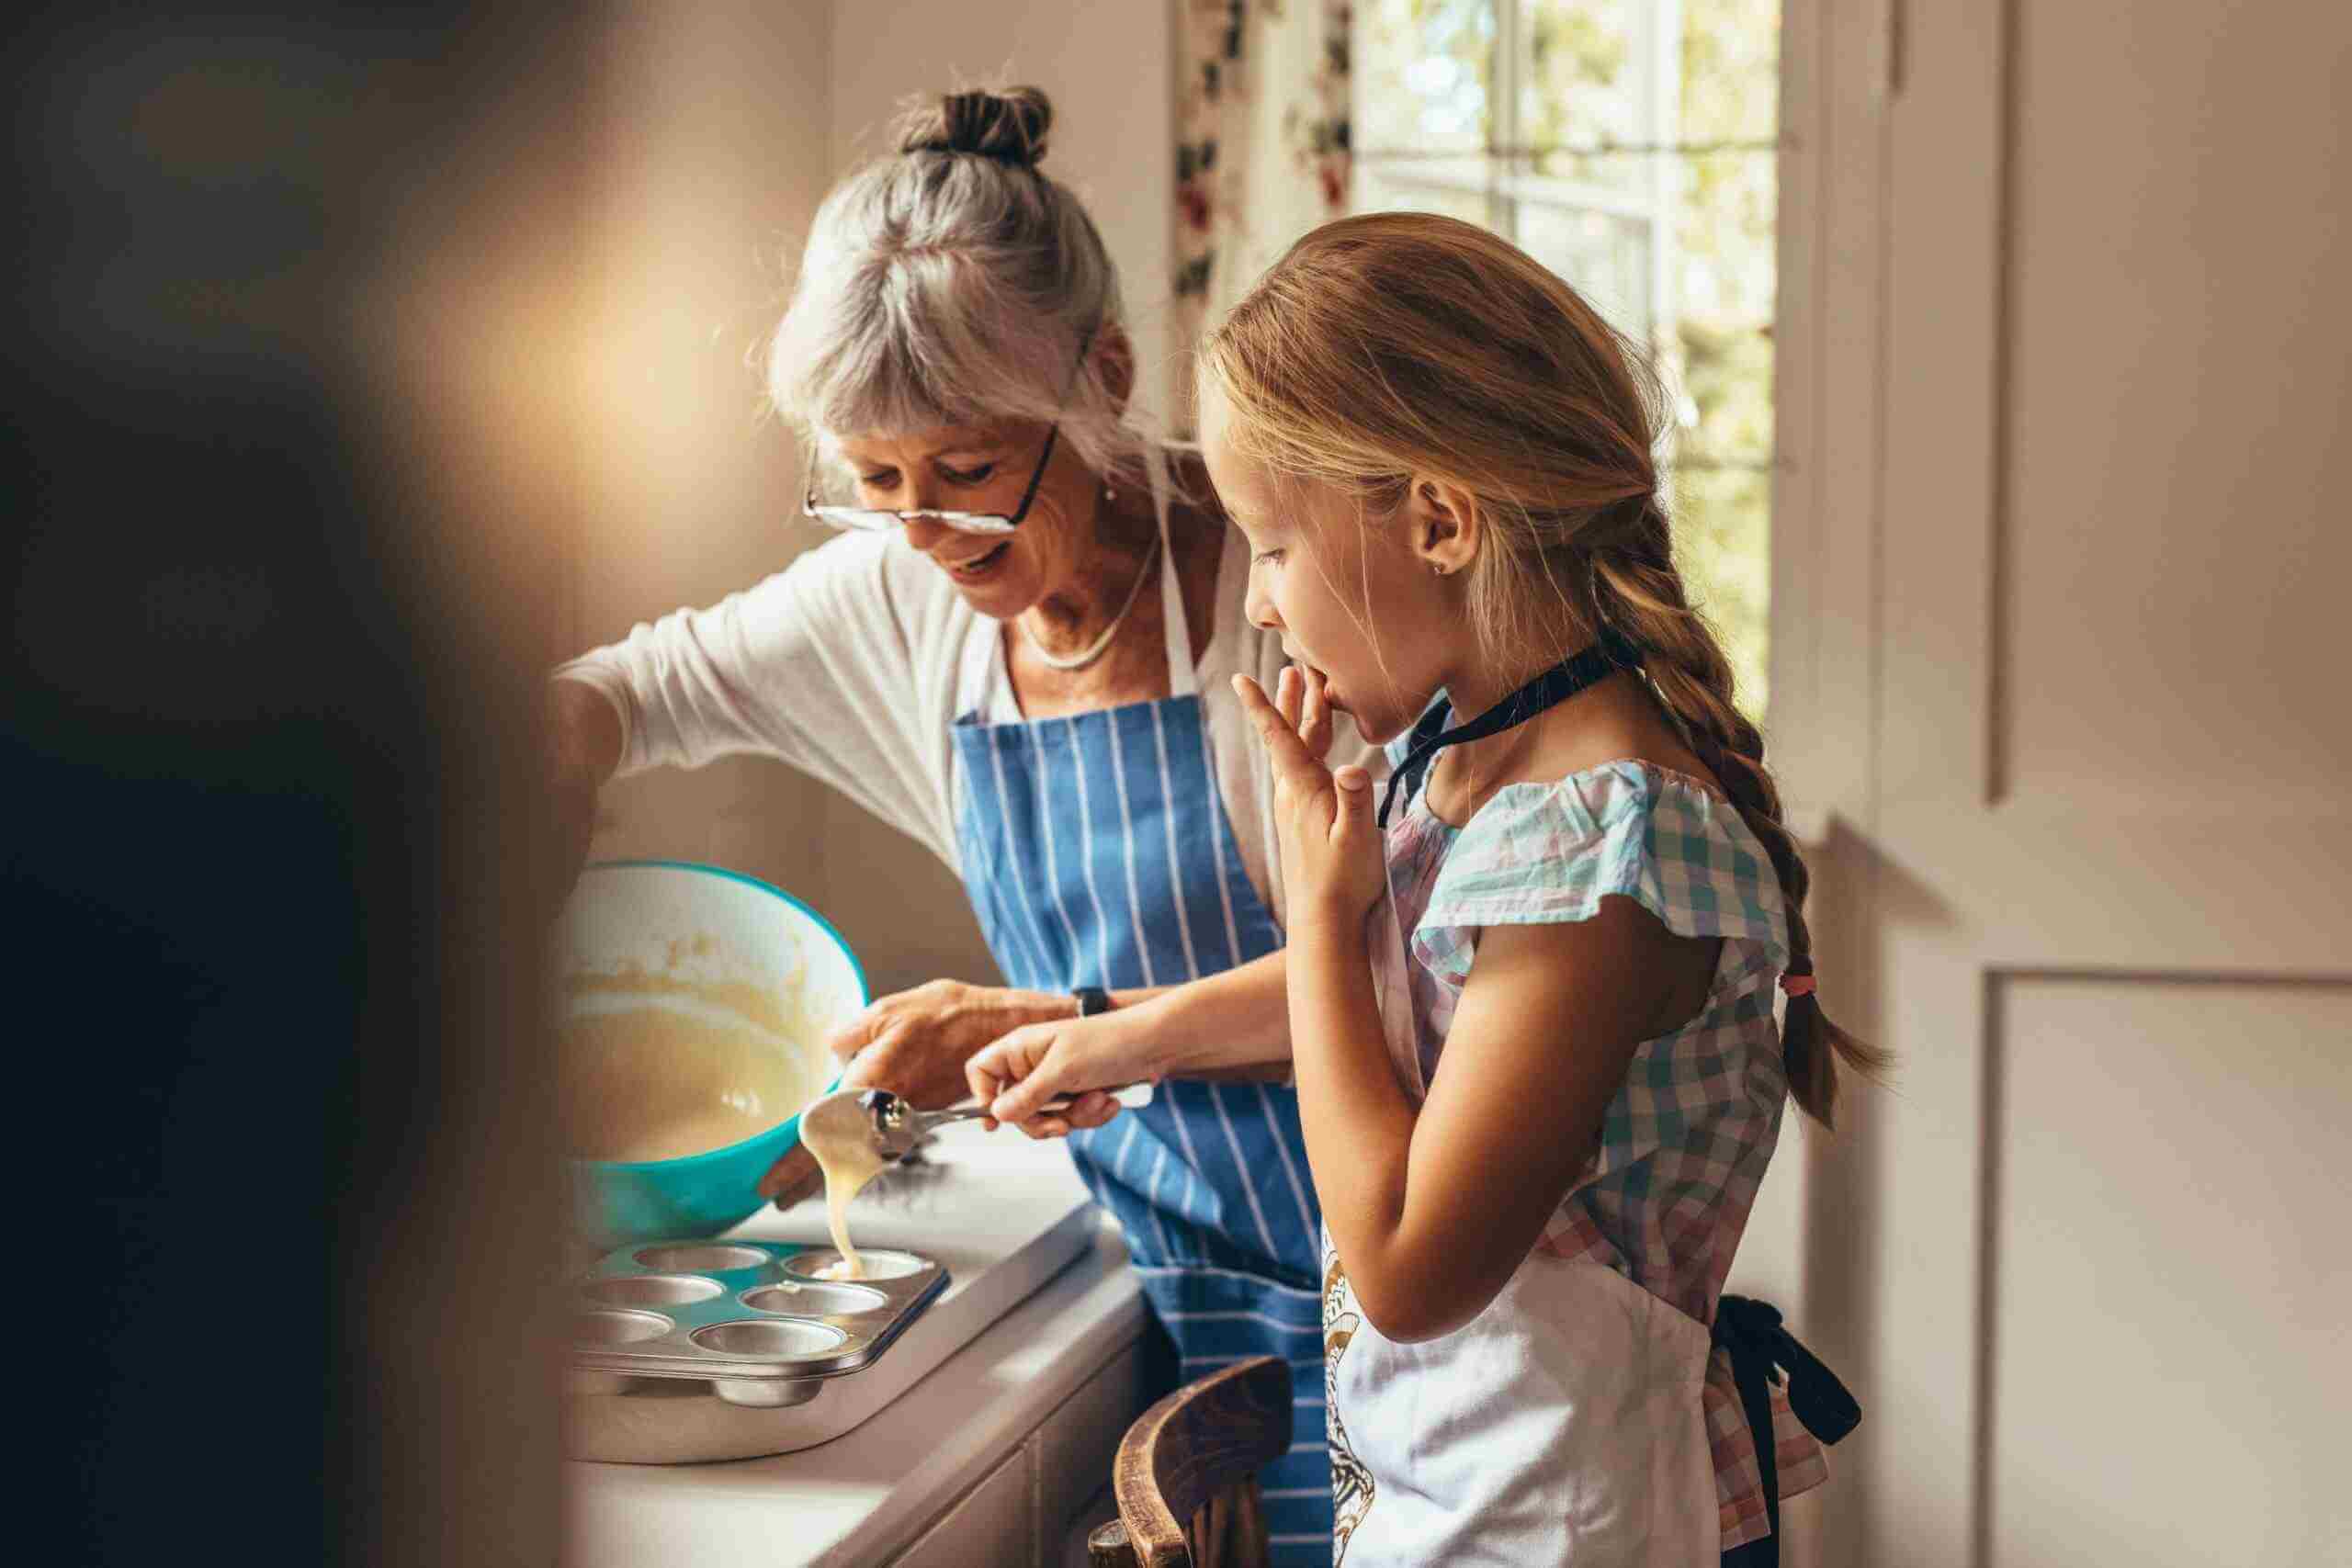 Older woman with grey hair and glasses baking with young girl in the kitchen